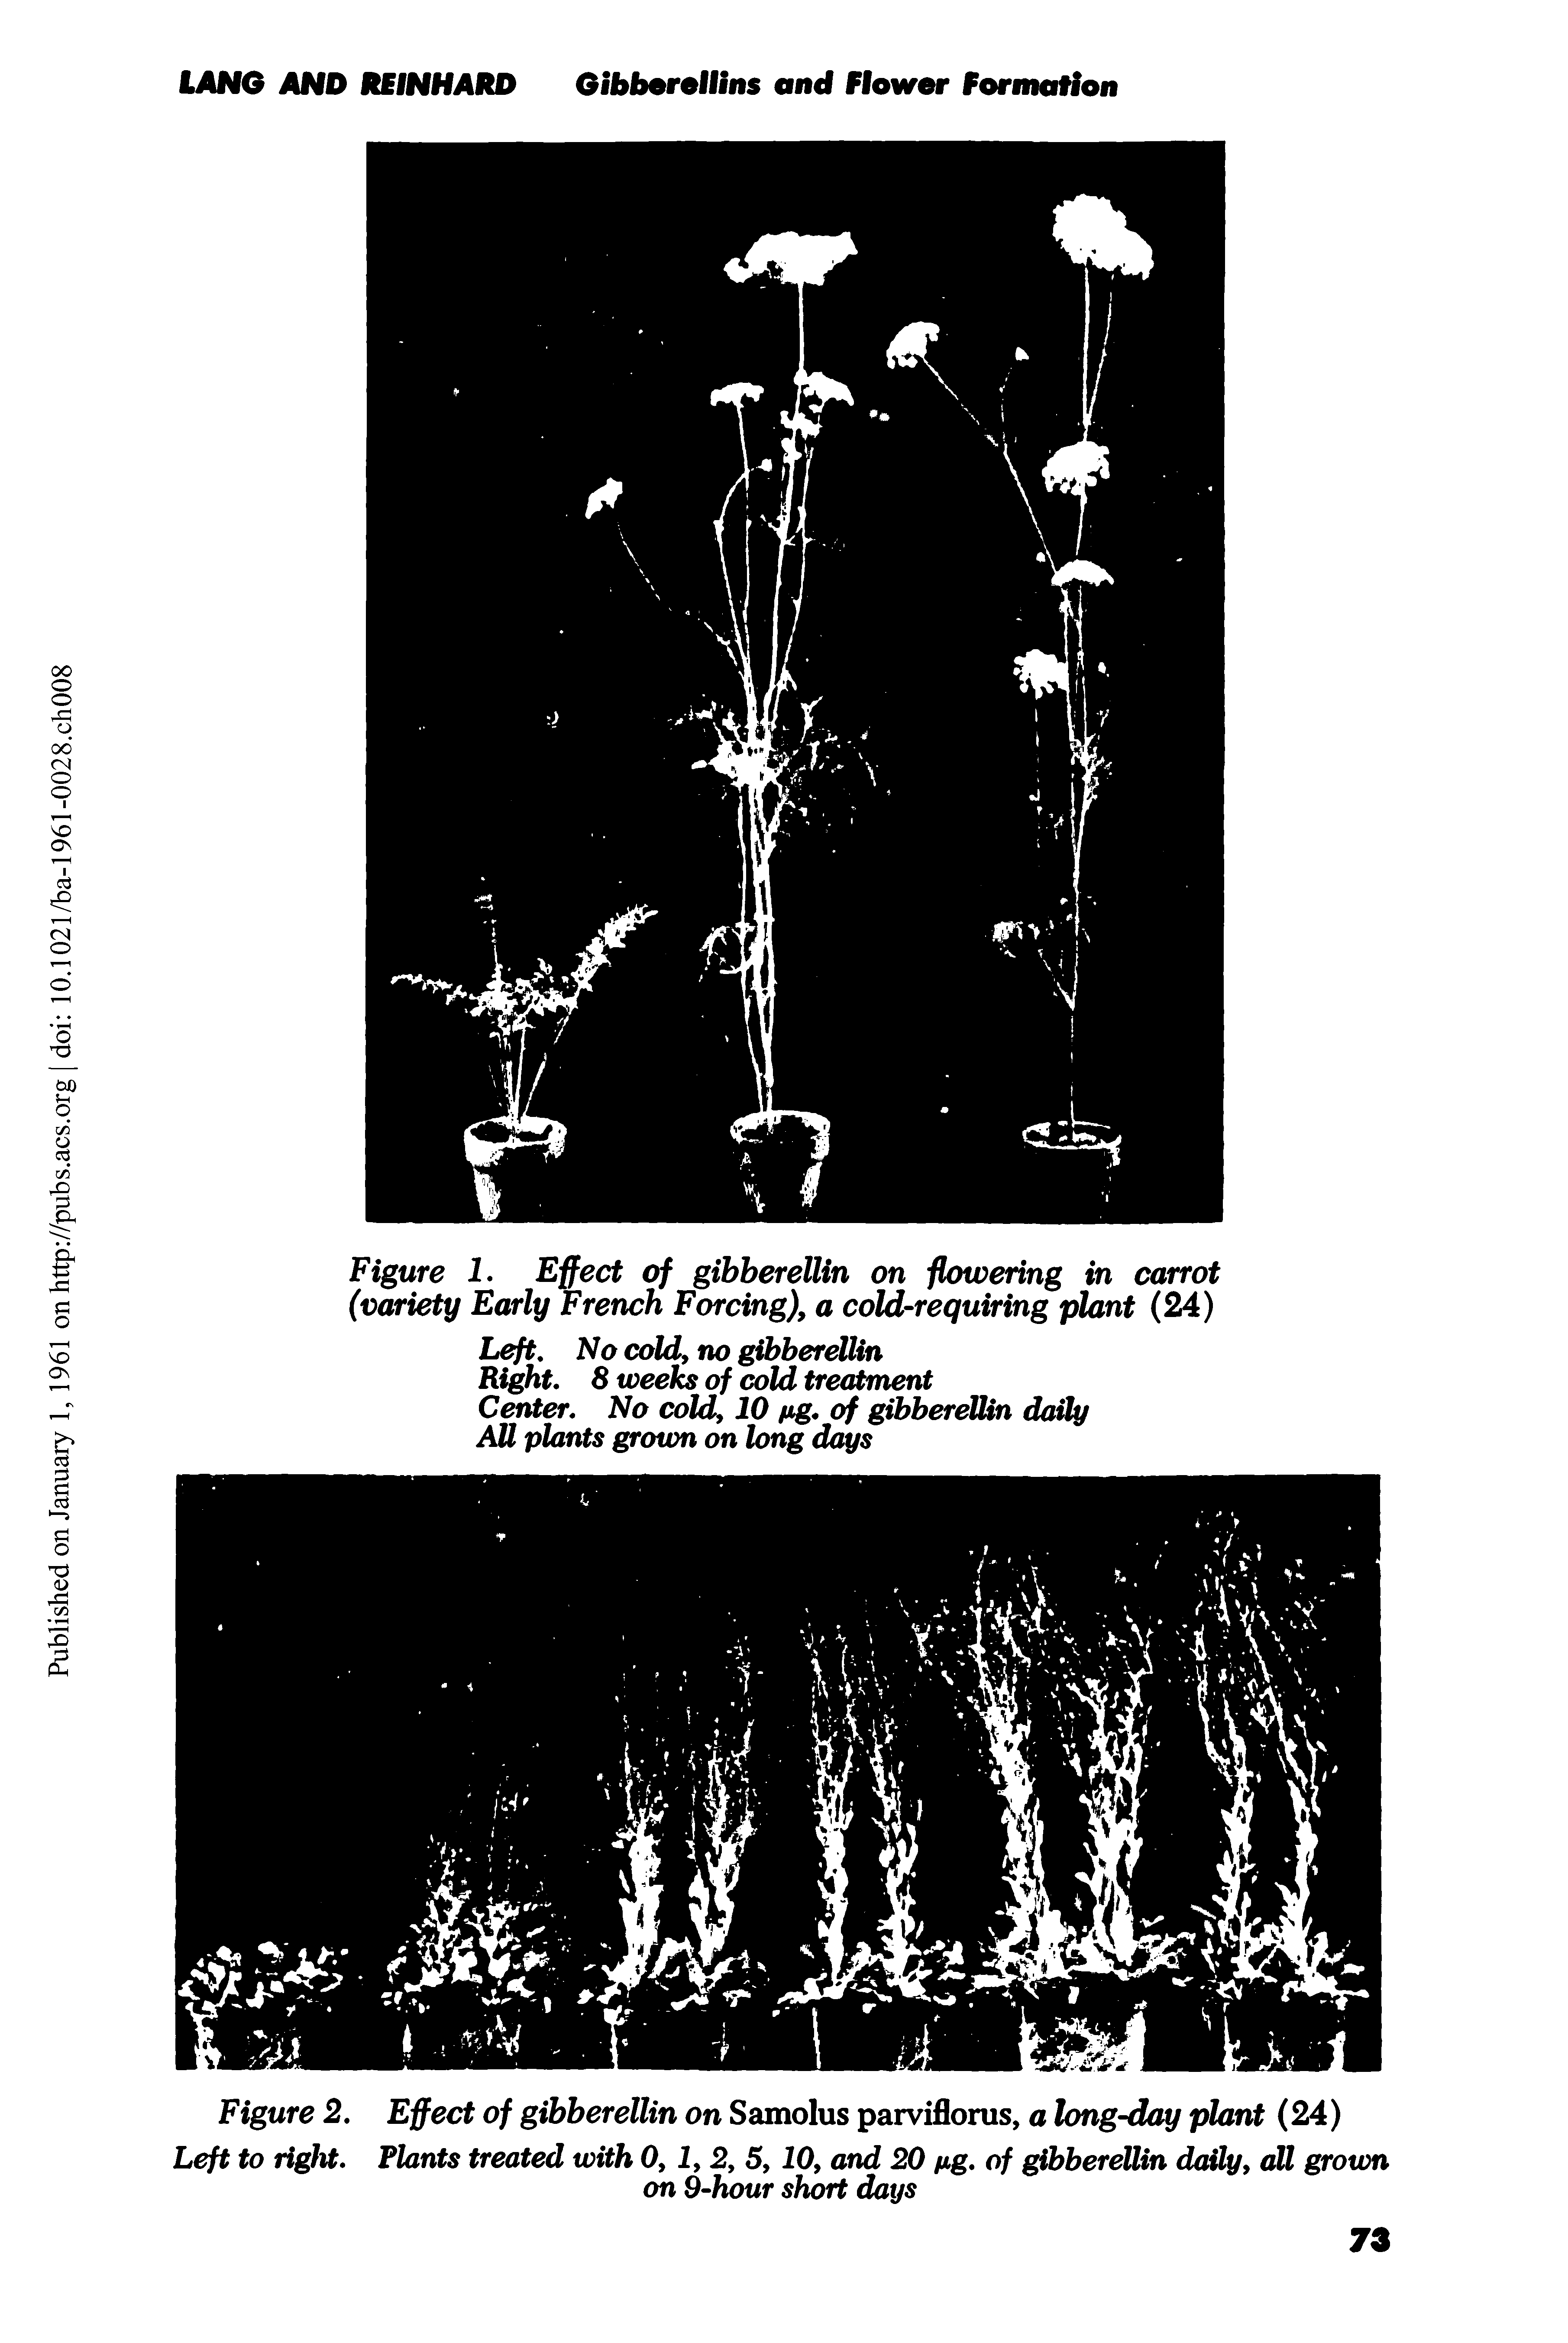 Figure 2. Effect of gibberellin on Samolus parviflorus, a long-day plant (24)...